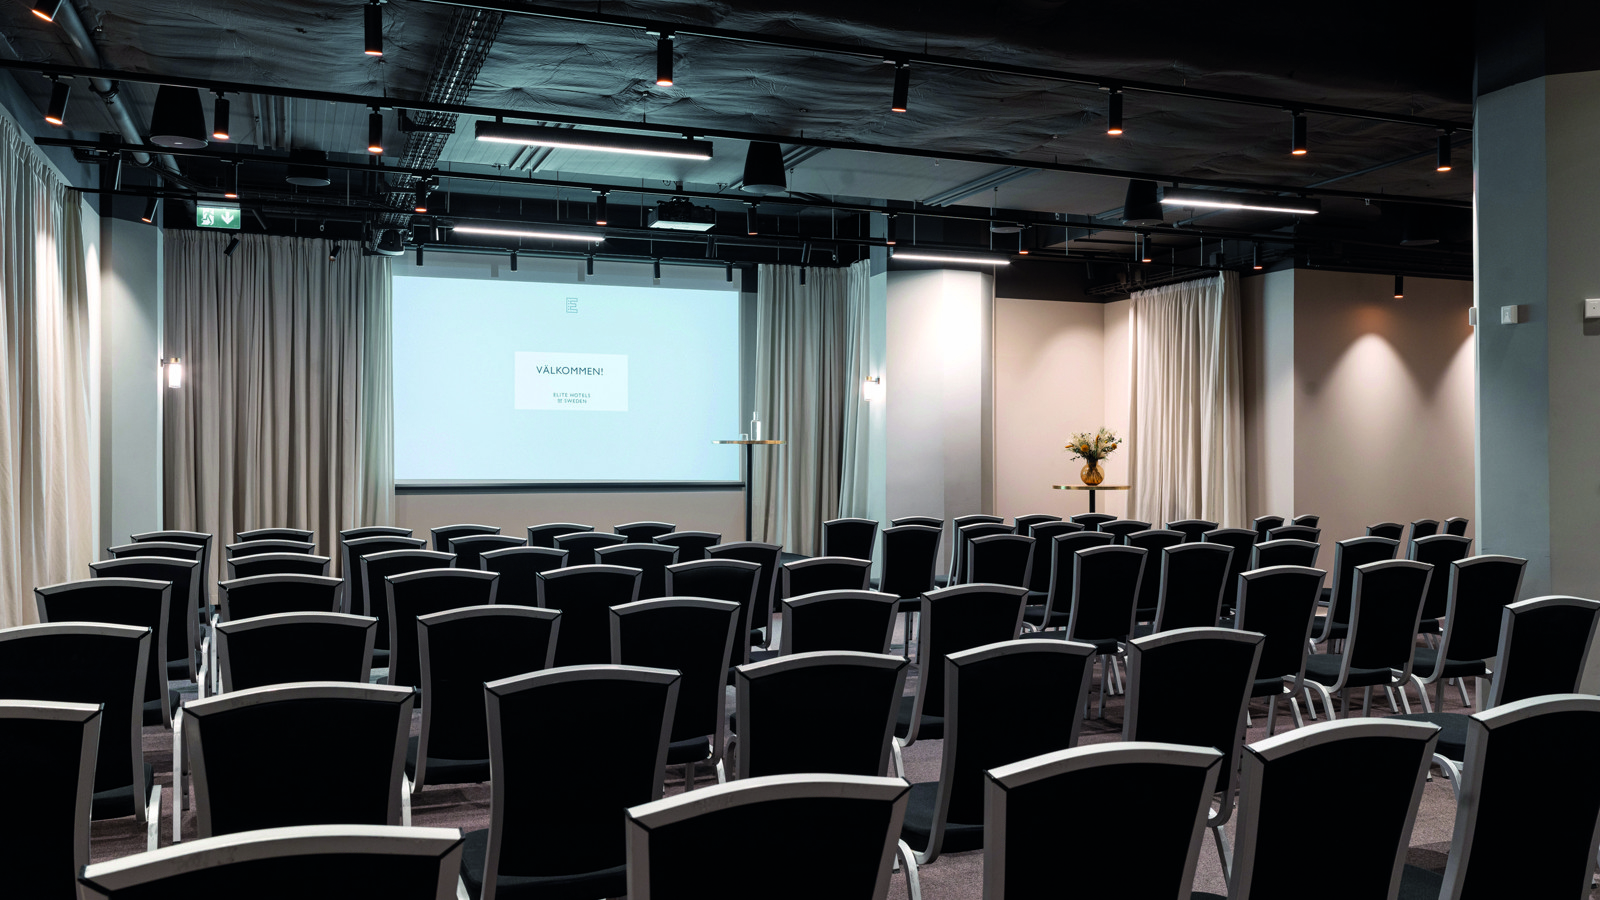 Conference room with cinema seating, gray chairs, white walls and projector